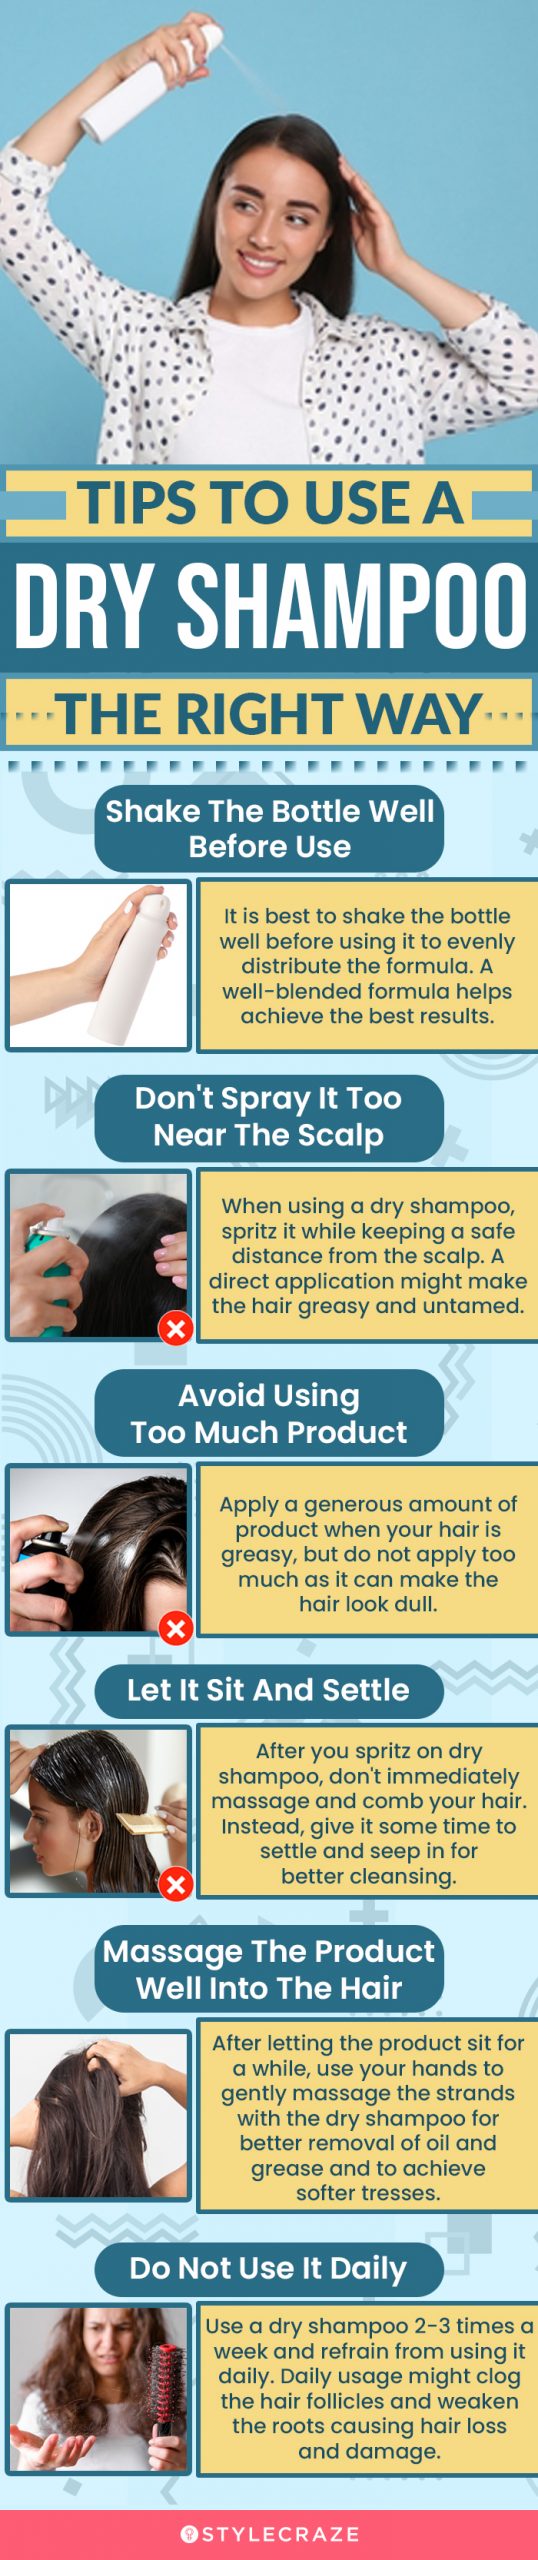 Tips To Use A Dry Shampoo The Correct Way (infographic)